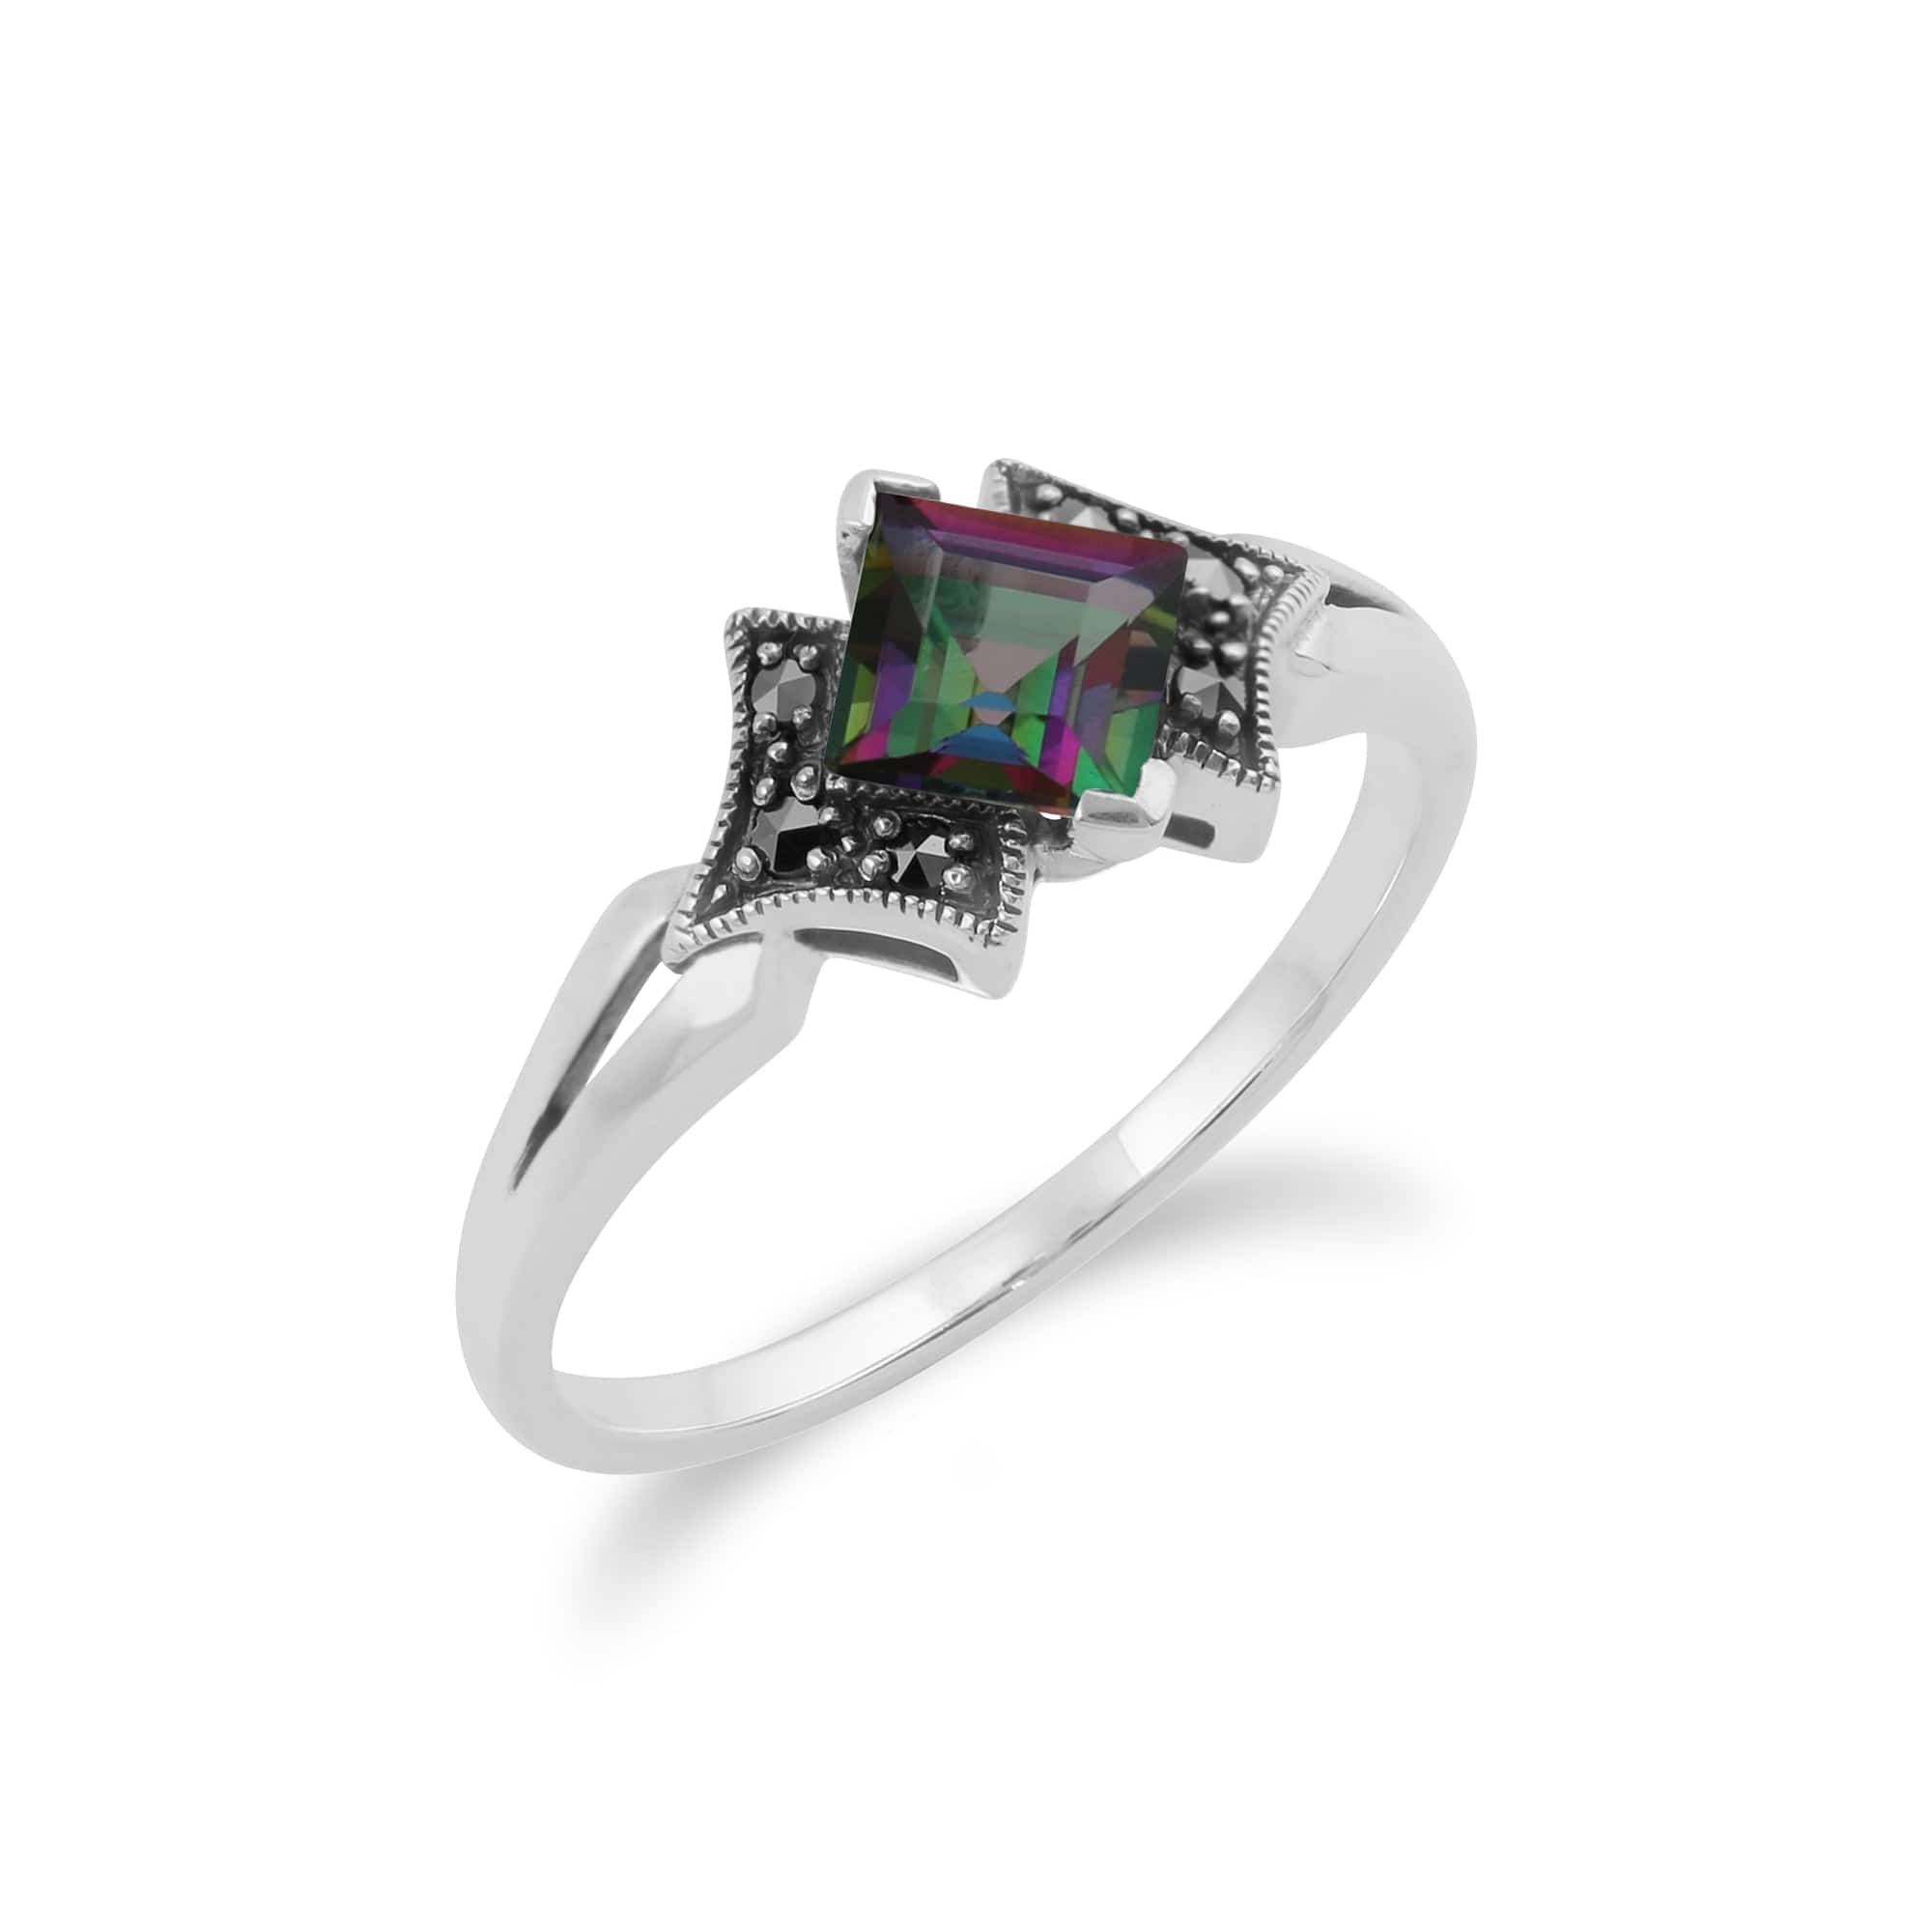 214R393305925 Art Deco Style Square Mystic Topaz & Marcasite Ring in 925 Sterling Silver 2